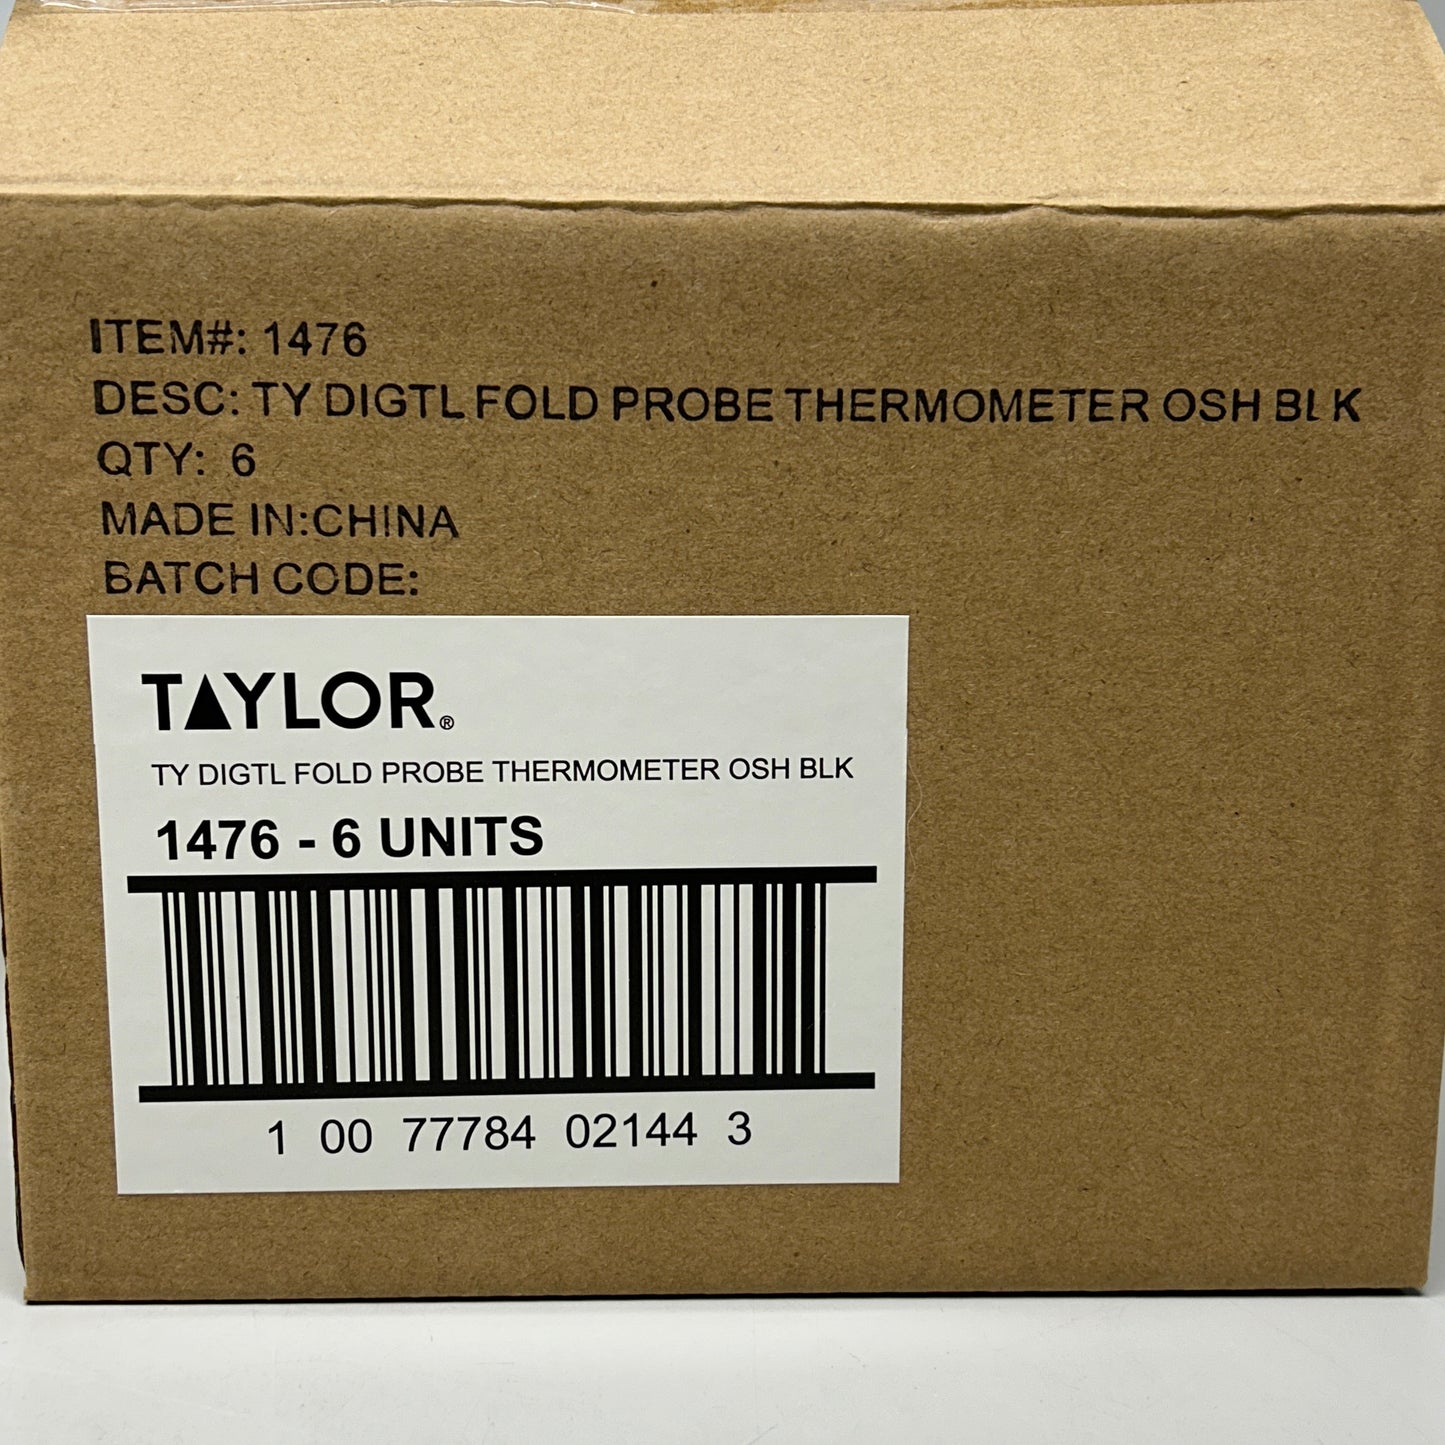 TAYLOR Compact Folding Thermometer Fahrenheit/Celsius Black (New)